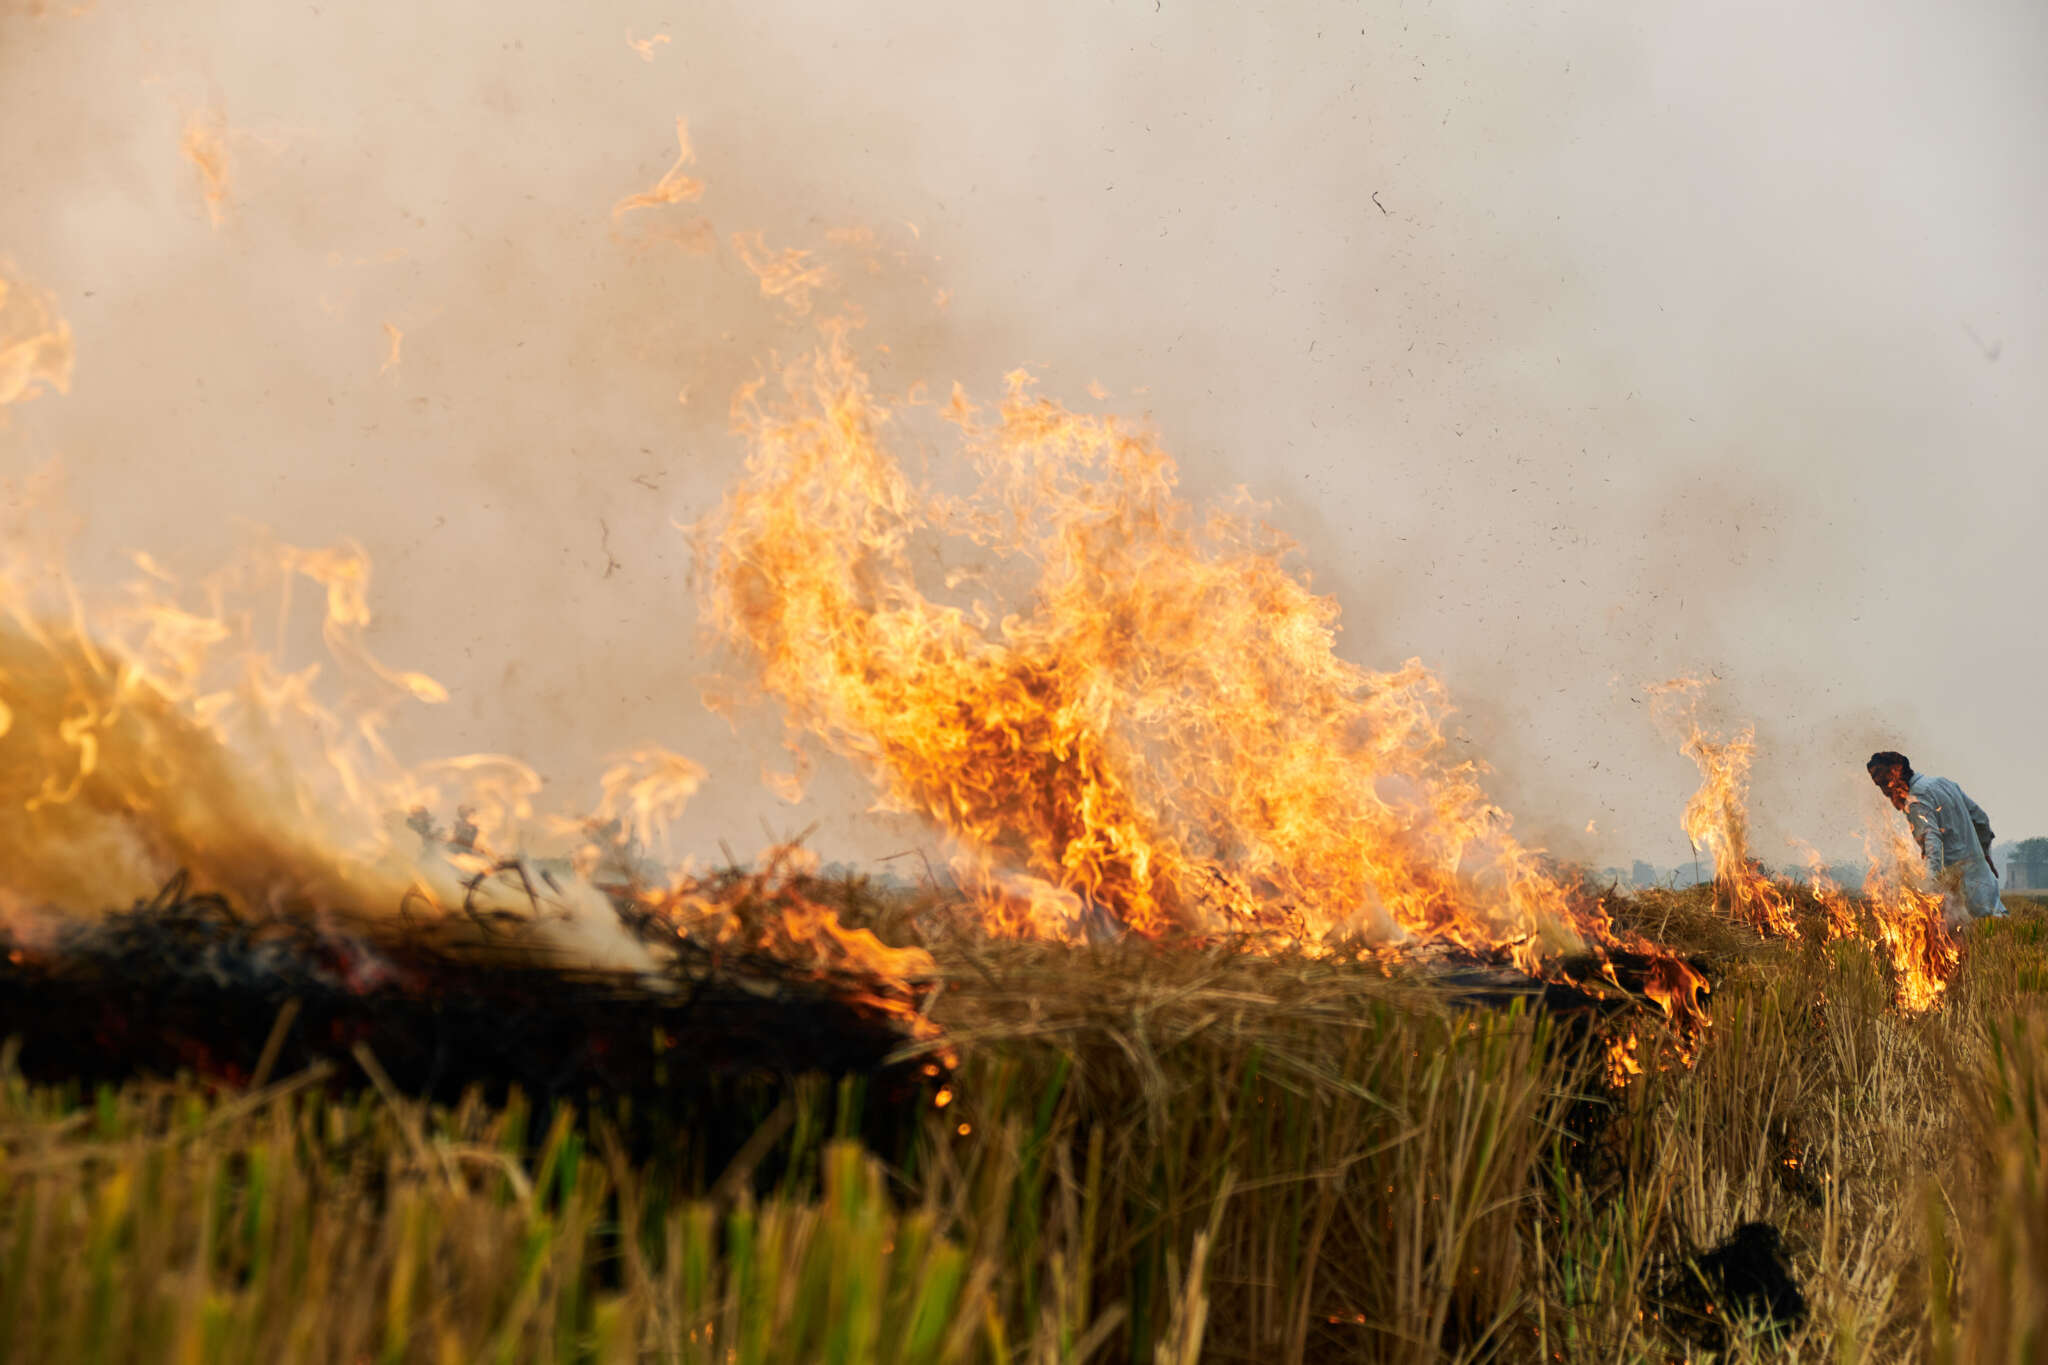 Farmers burning field to prepare for planting